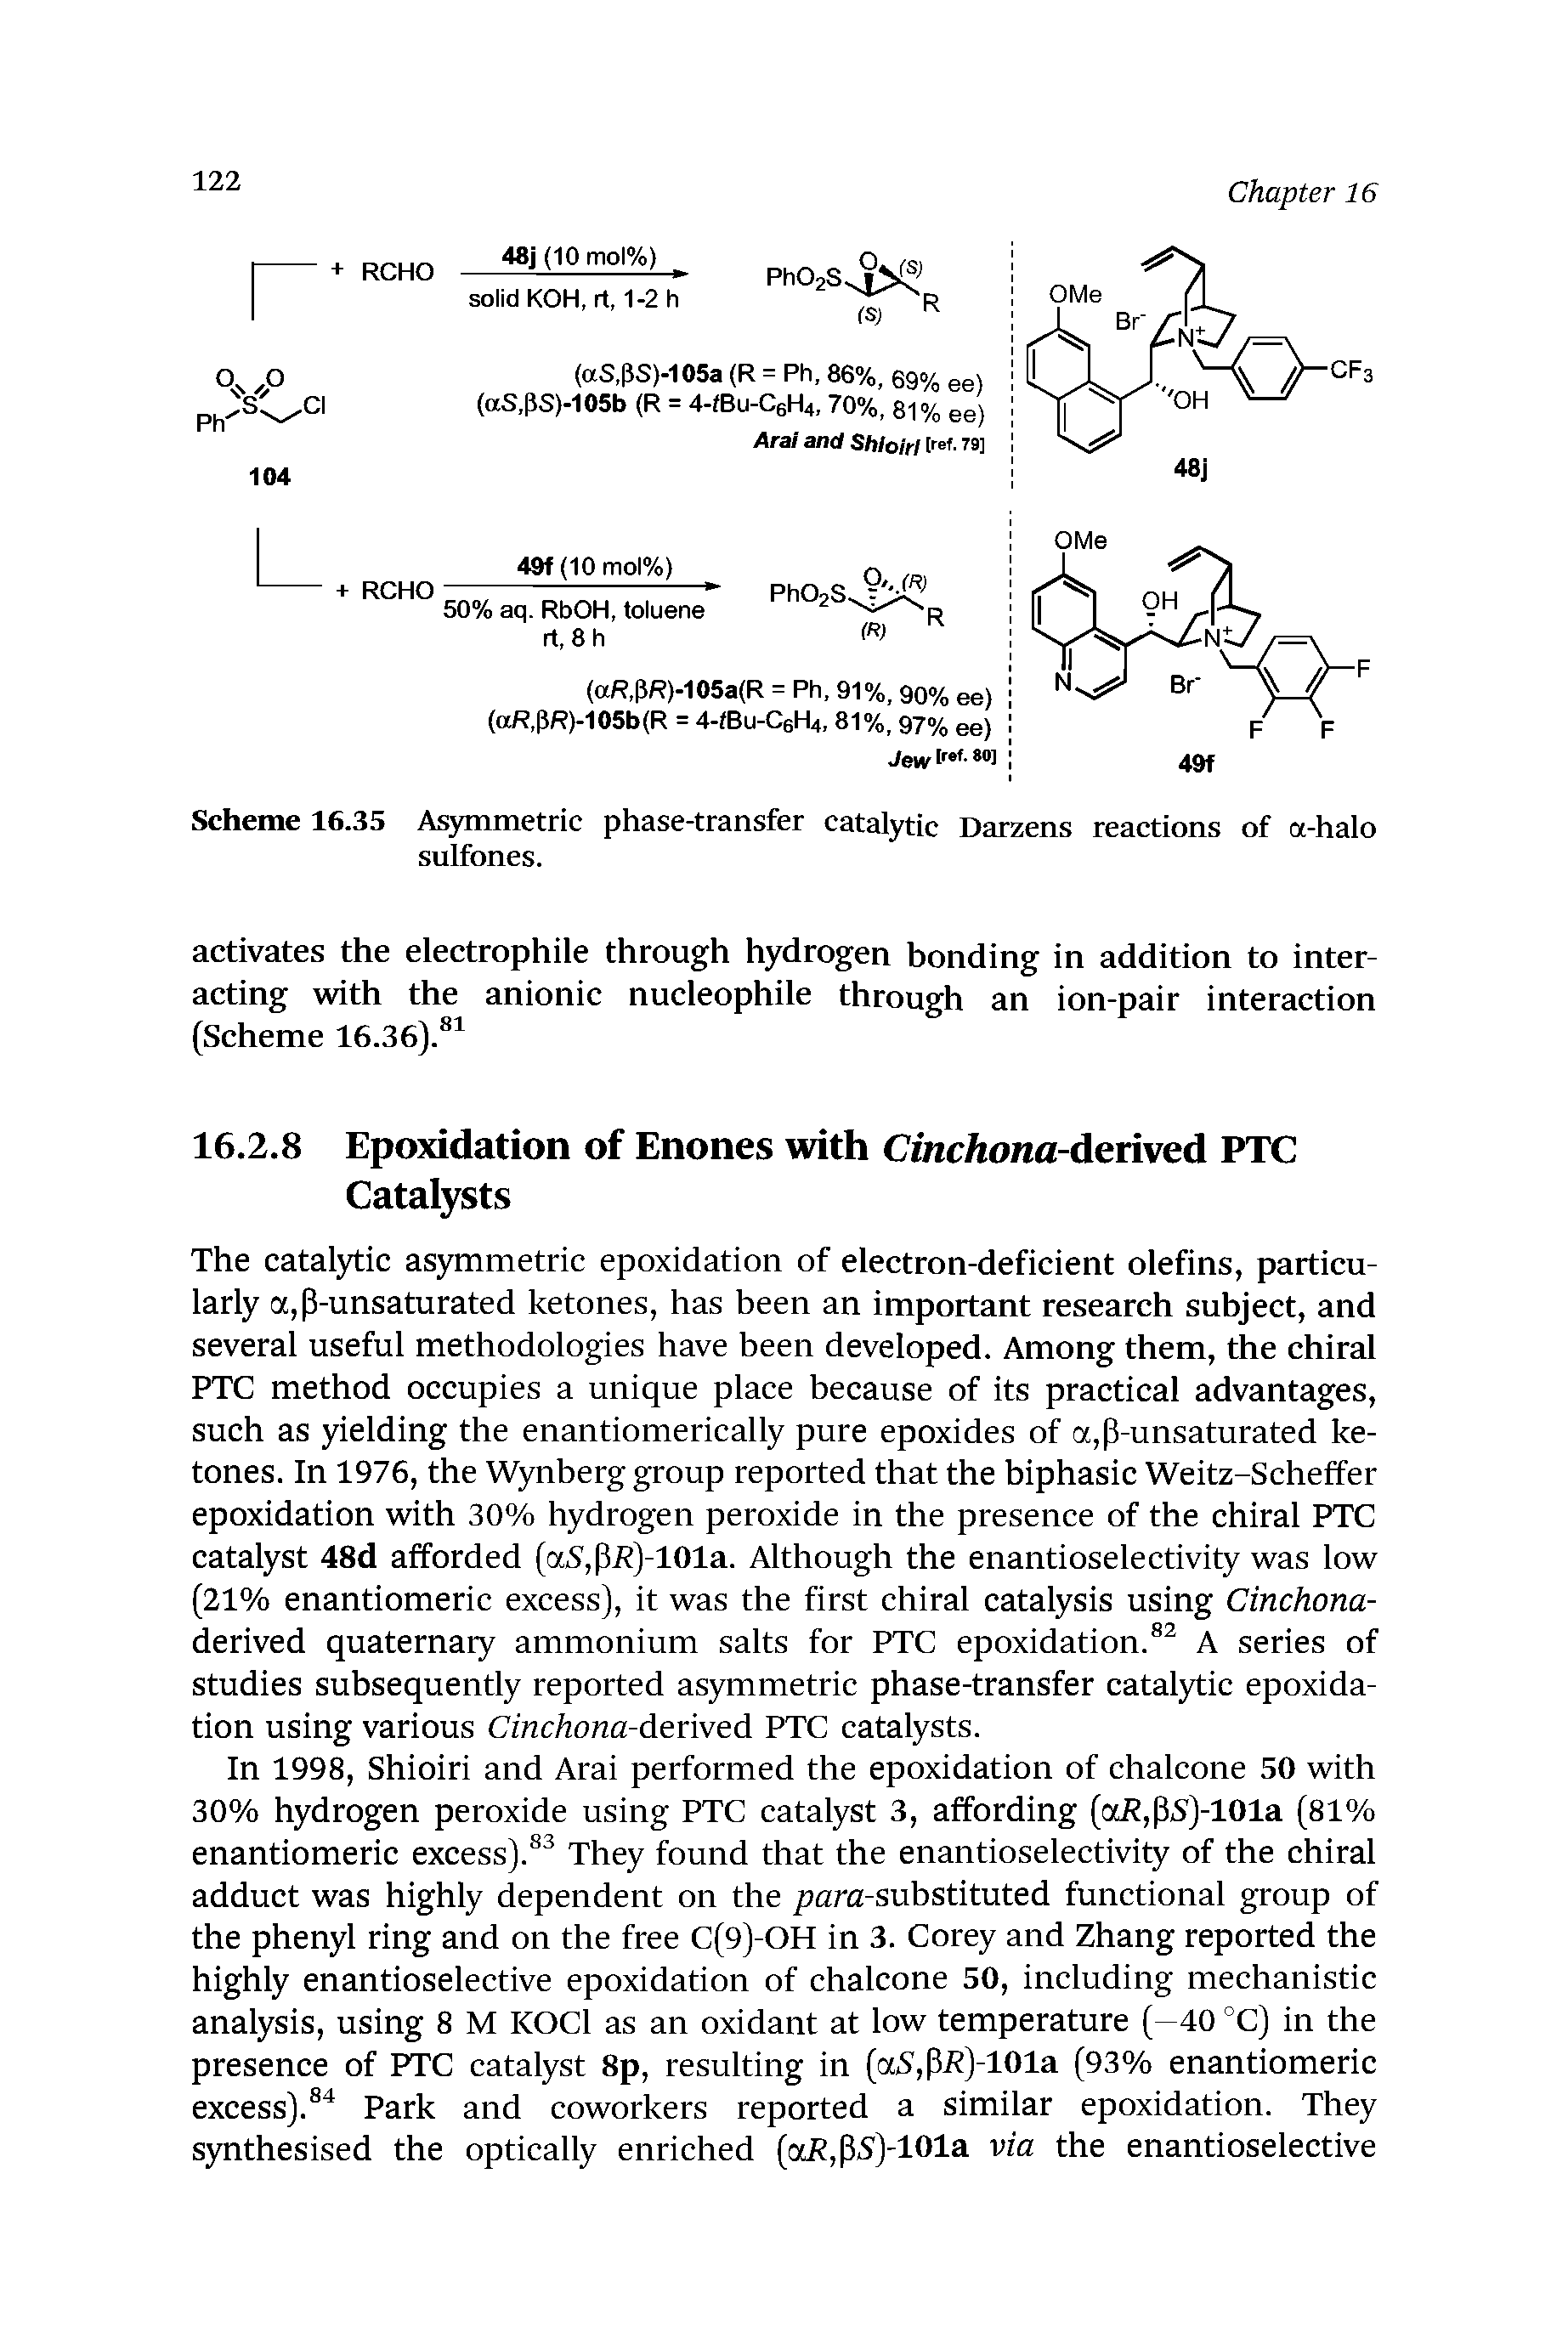 Scheme 16.35 Aqmmetric phase-transfer catal)d ic Darzens reactions of a-halo sulfones.